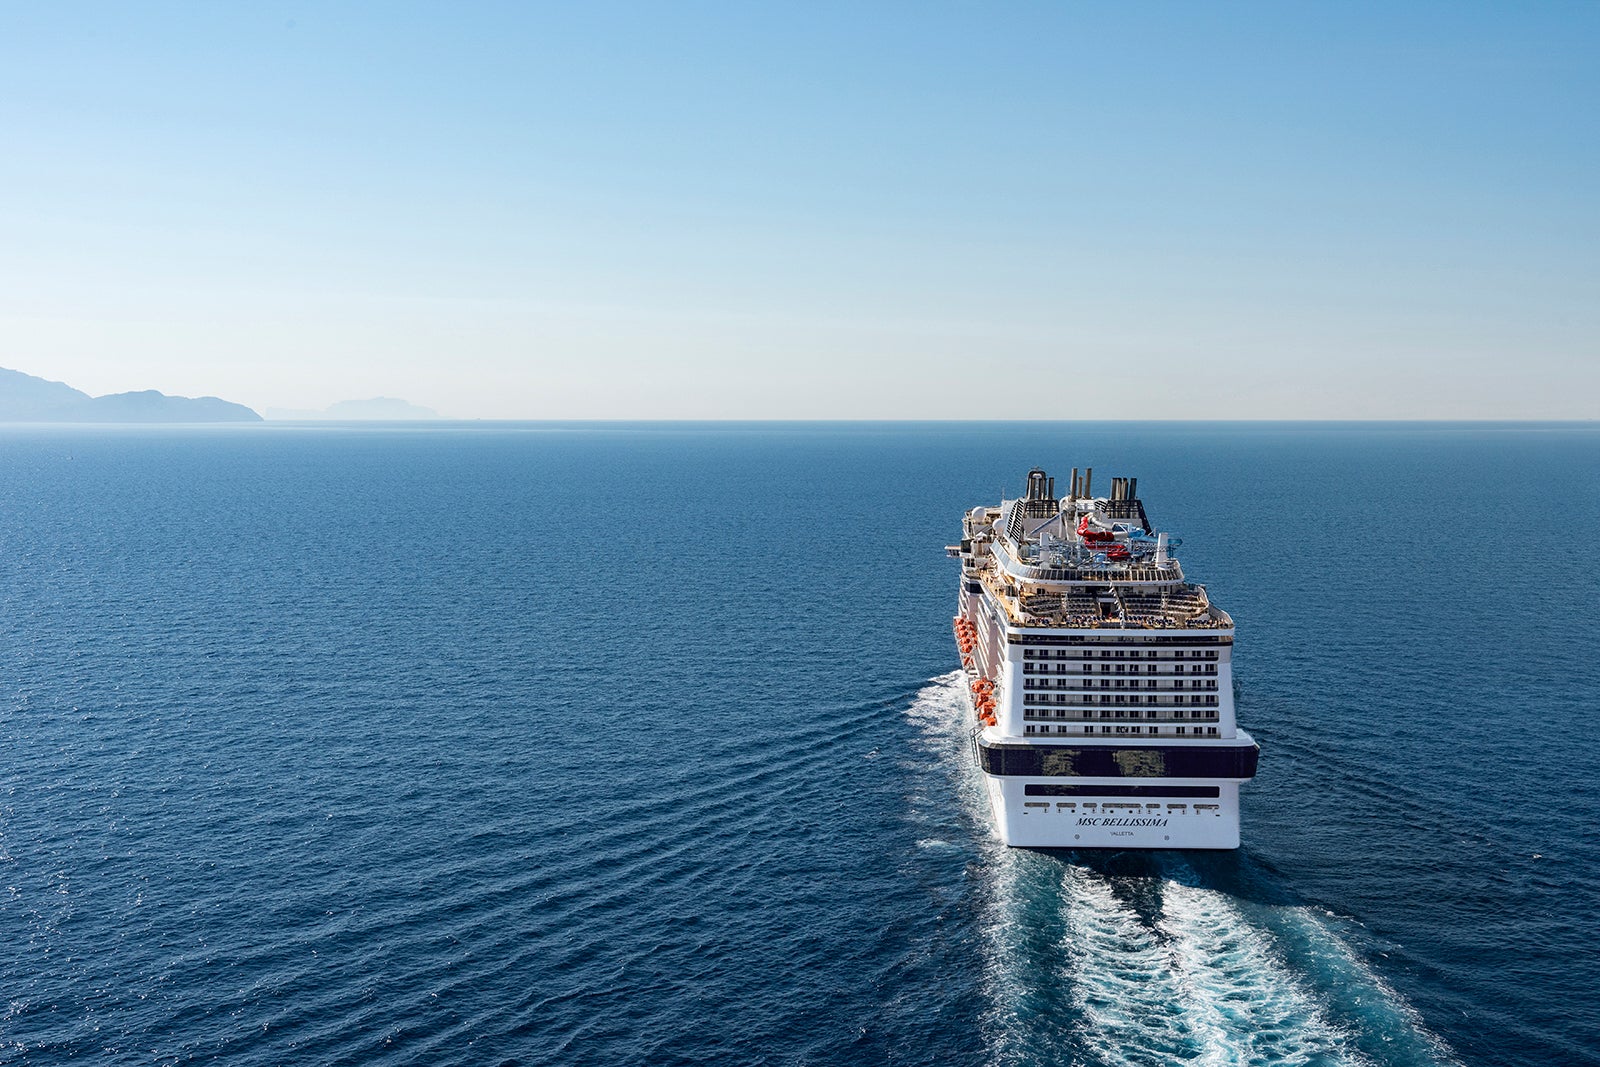 Deal watch: 7-night Europe cruises selling for less than $200 as lines struggle to fill ships